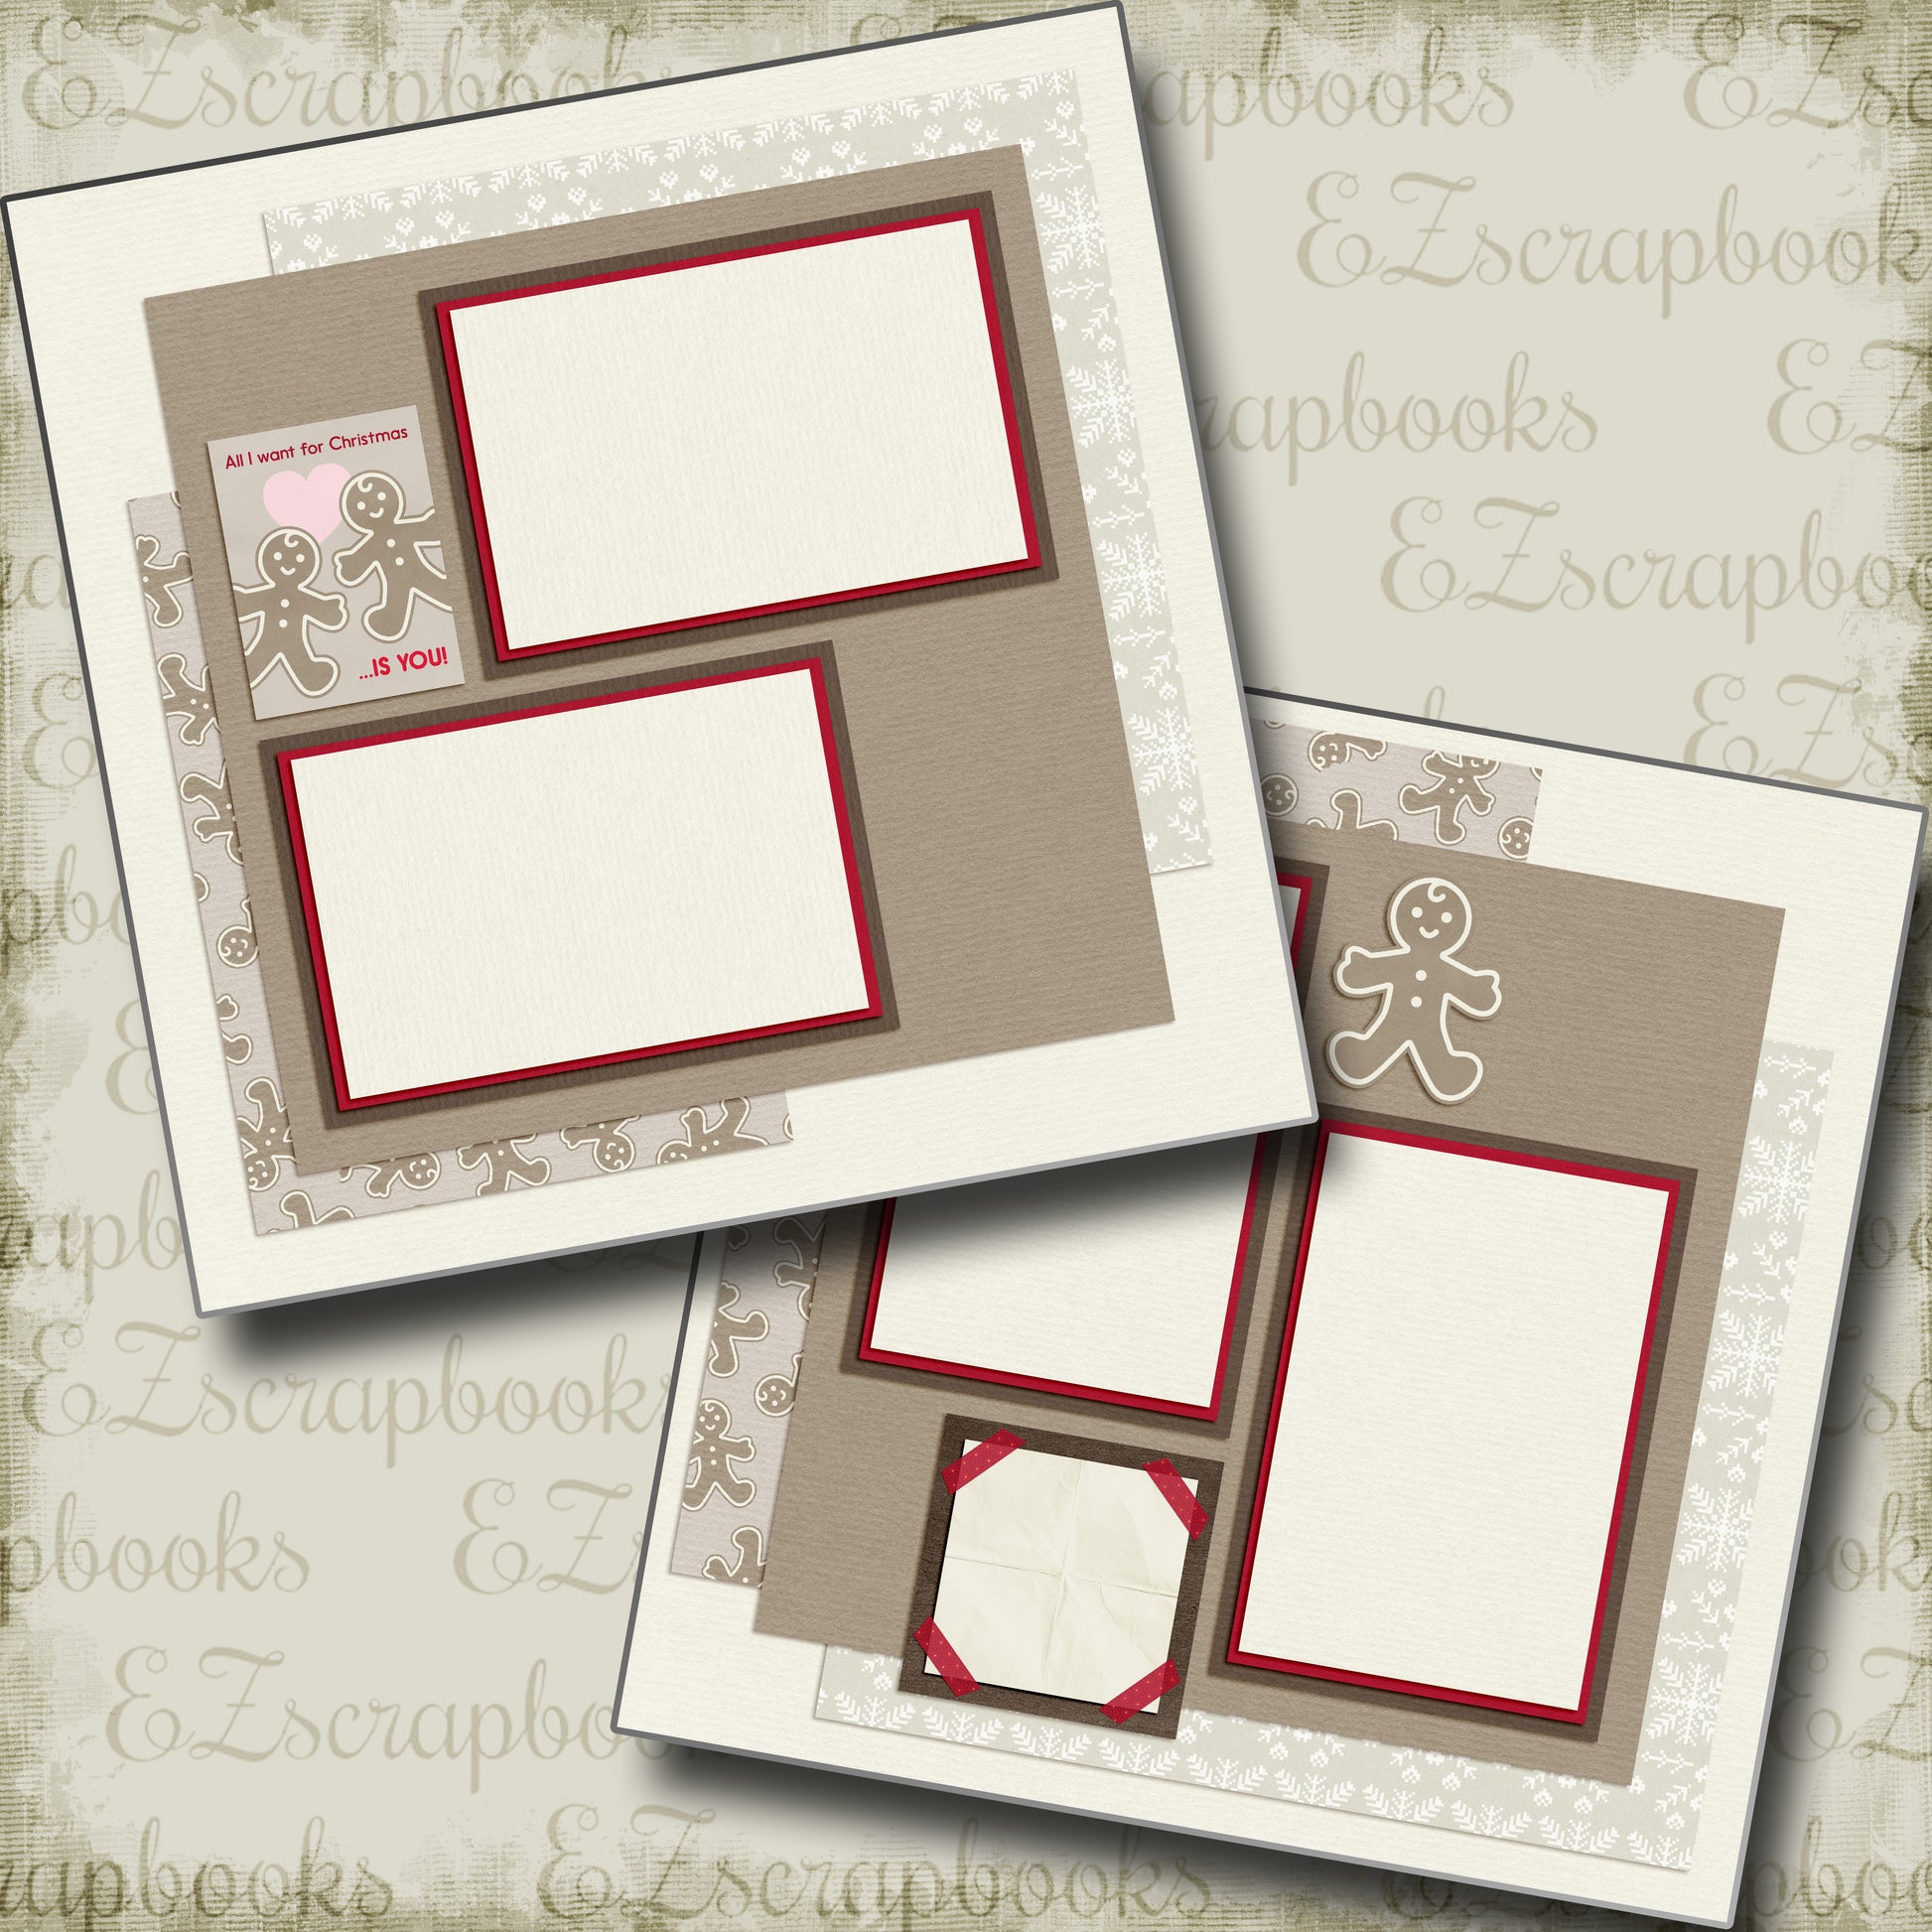 All I Want For Christmas - 5192 - EZscrapbooks Scrapbook Layouts Christmas